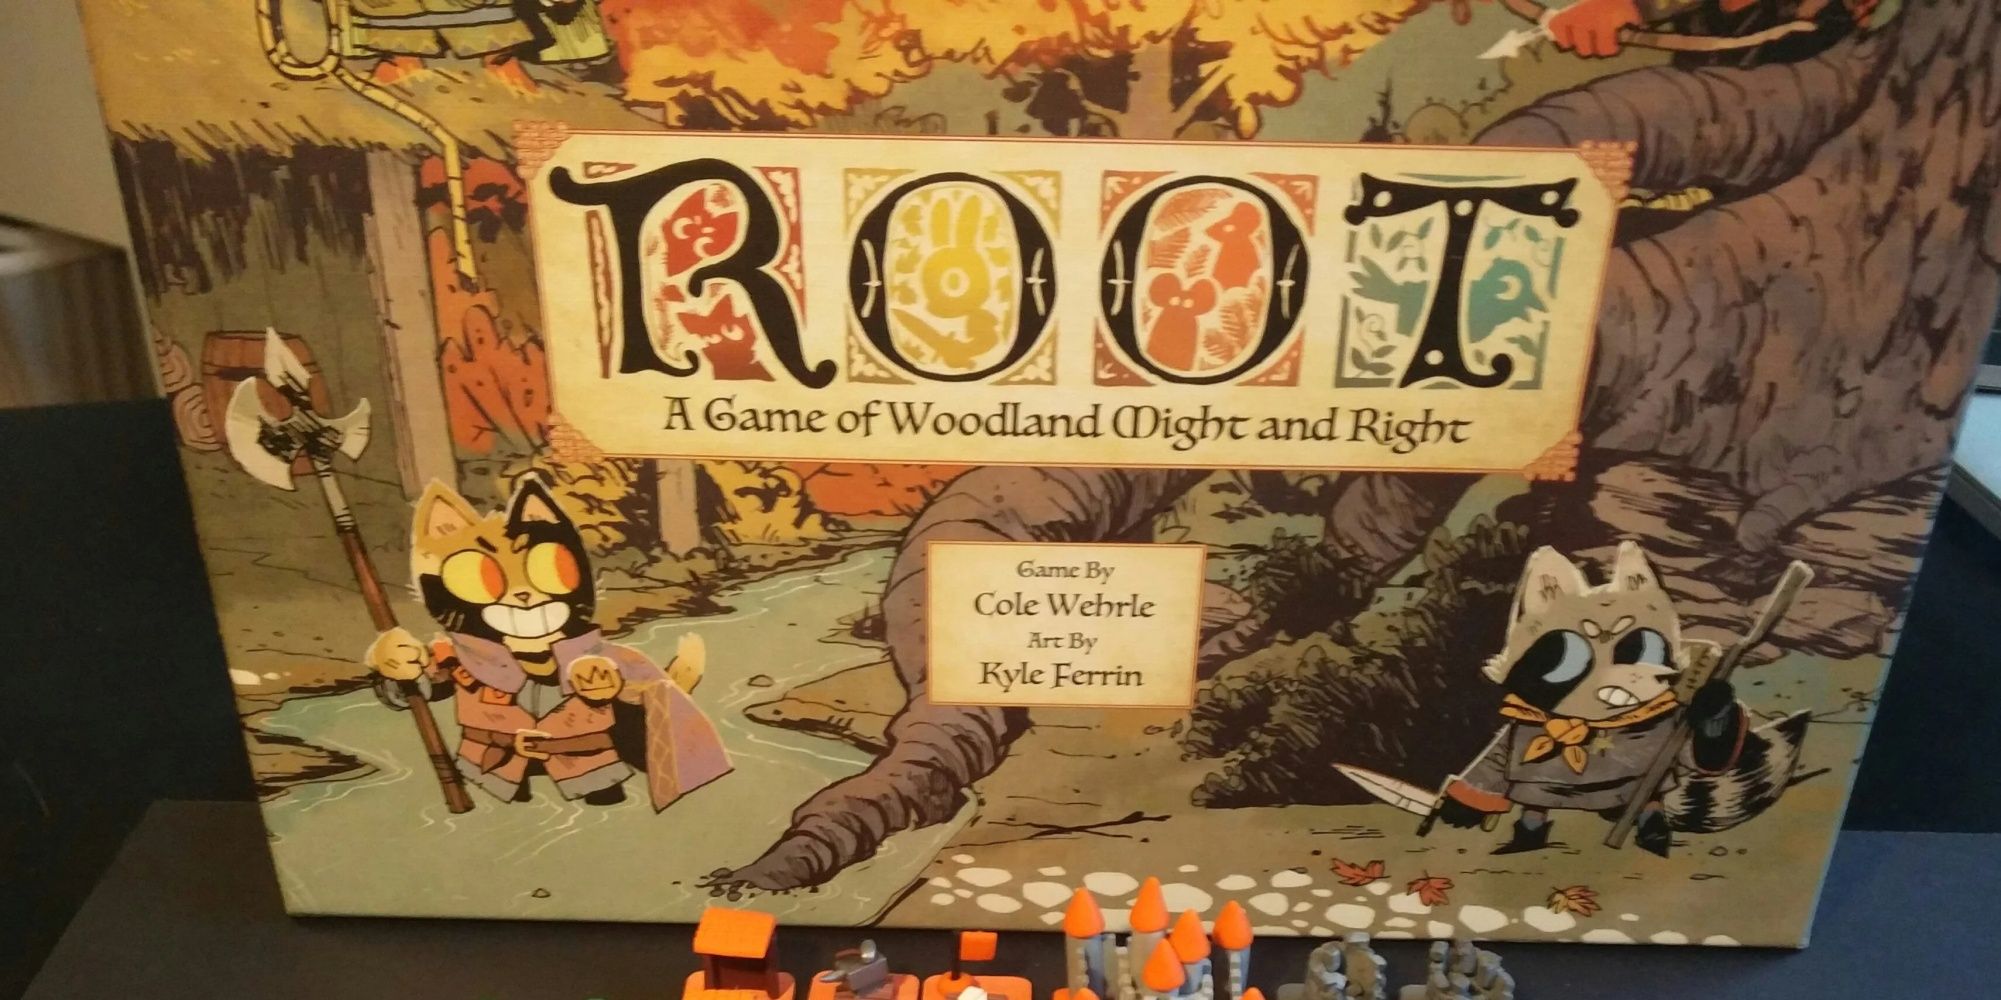 Box art for Root, the board game